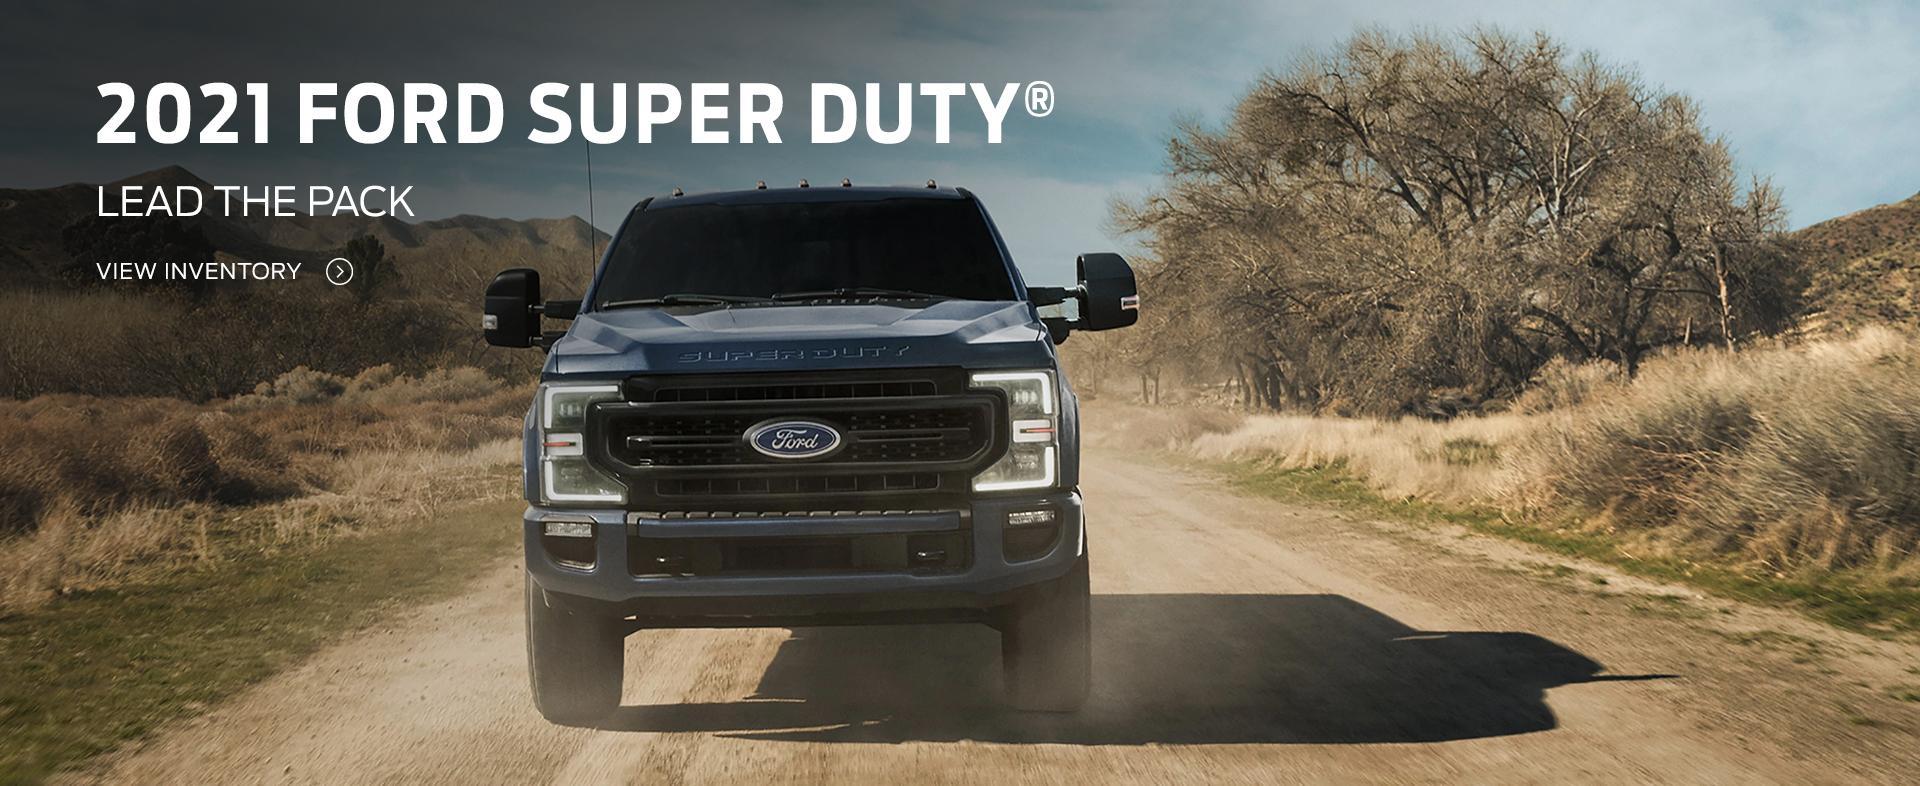 Ford Home | Taylor Ford Amherst | Amherst Ford Dealership  2021 Super Duty